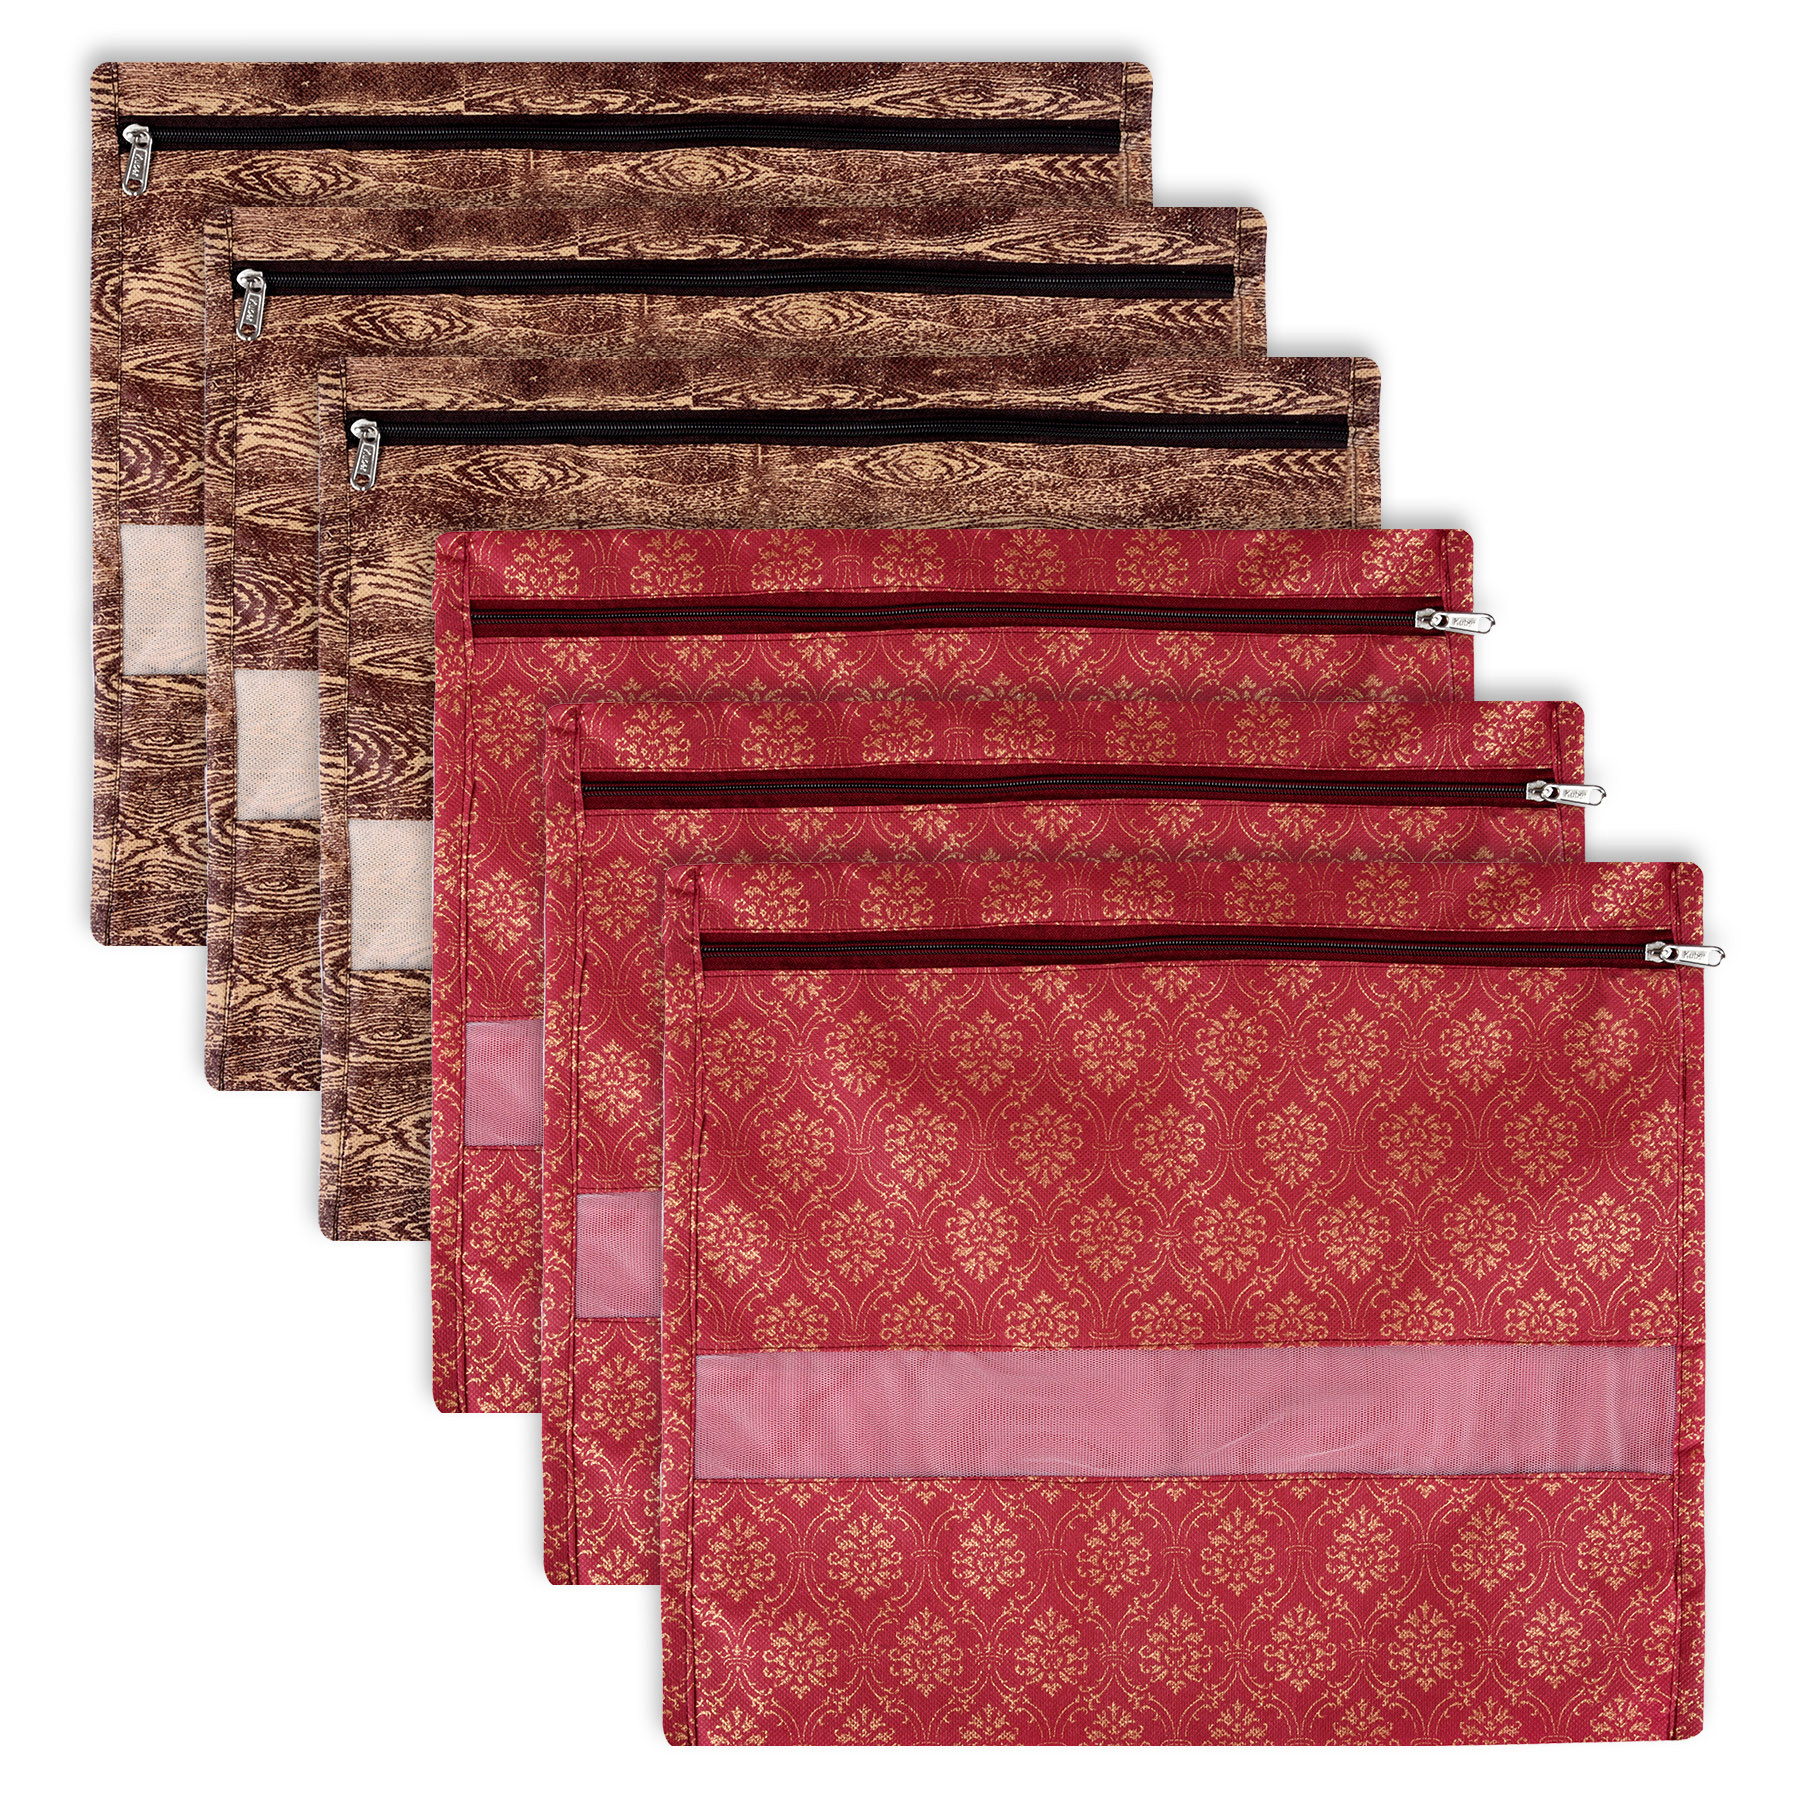 Kuber Industries Saree Bags | Clothes Bags for Storage | Non-Woven Wardrobe Organizer | Mesh Window Cloth Storage Bags Set | Single Packing Saree Bags | Printed | Brown & Maroon